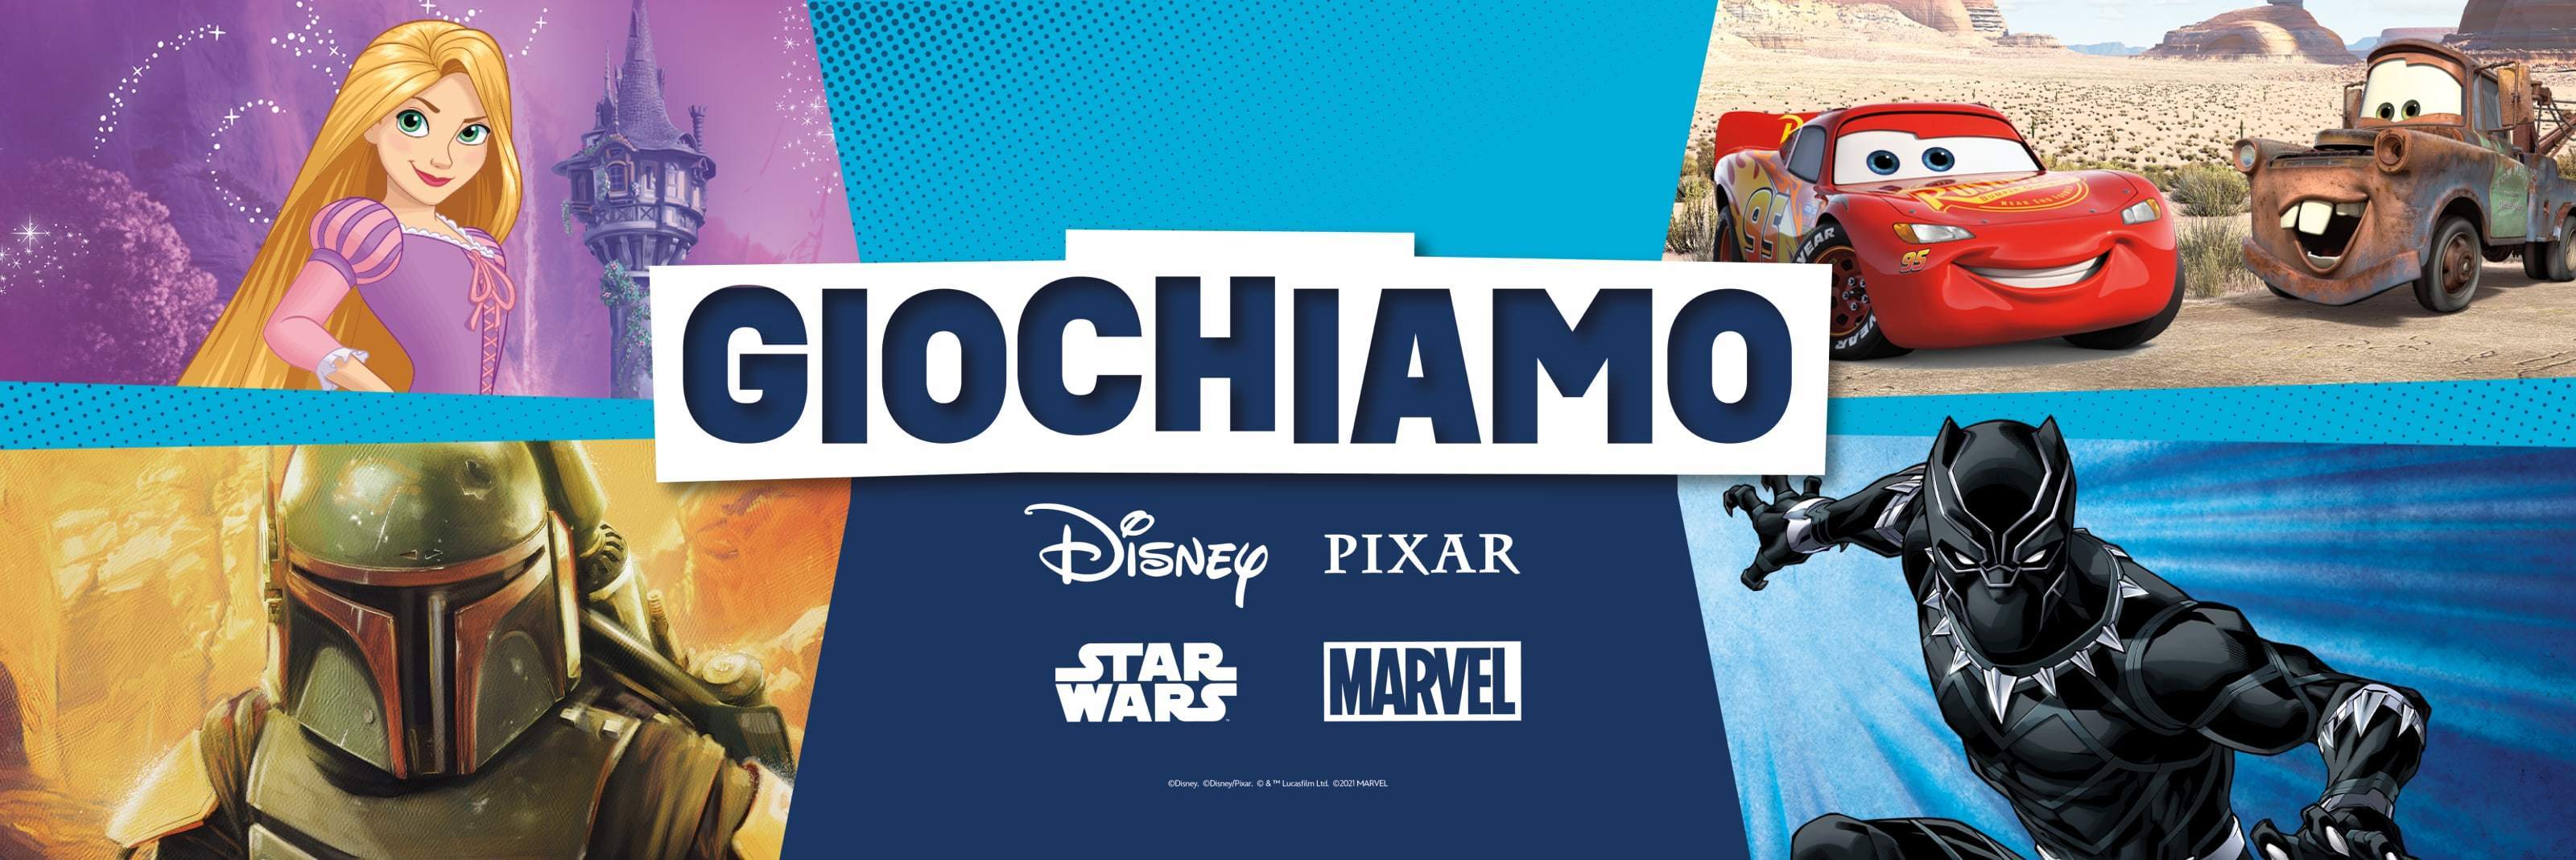 Disney, Pixar, Star Wars and Marvel characters in front of a blue background with brand logos in the centre